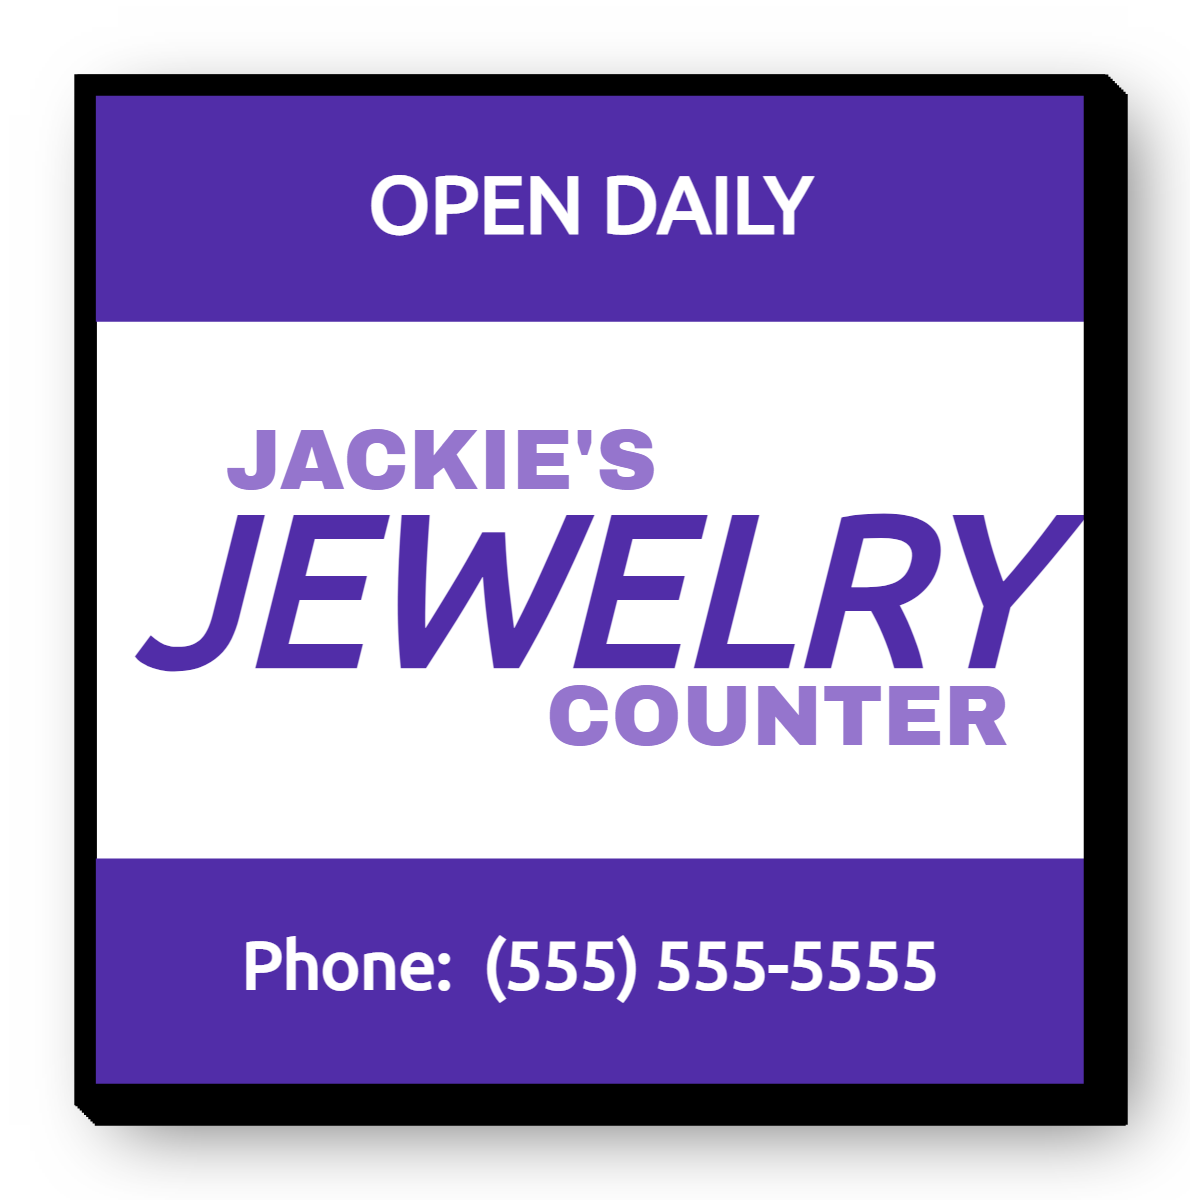 Jackie's Jewelry Counter Single Face Lit Cabinet Sign